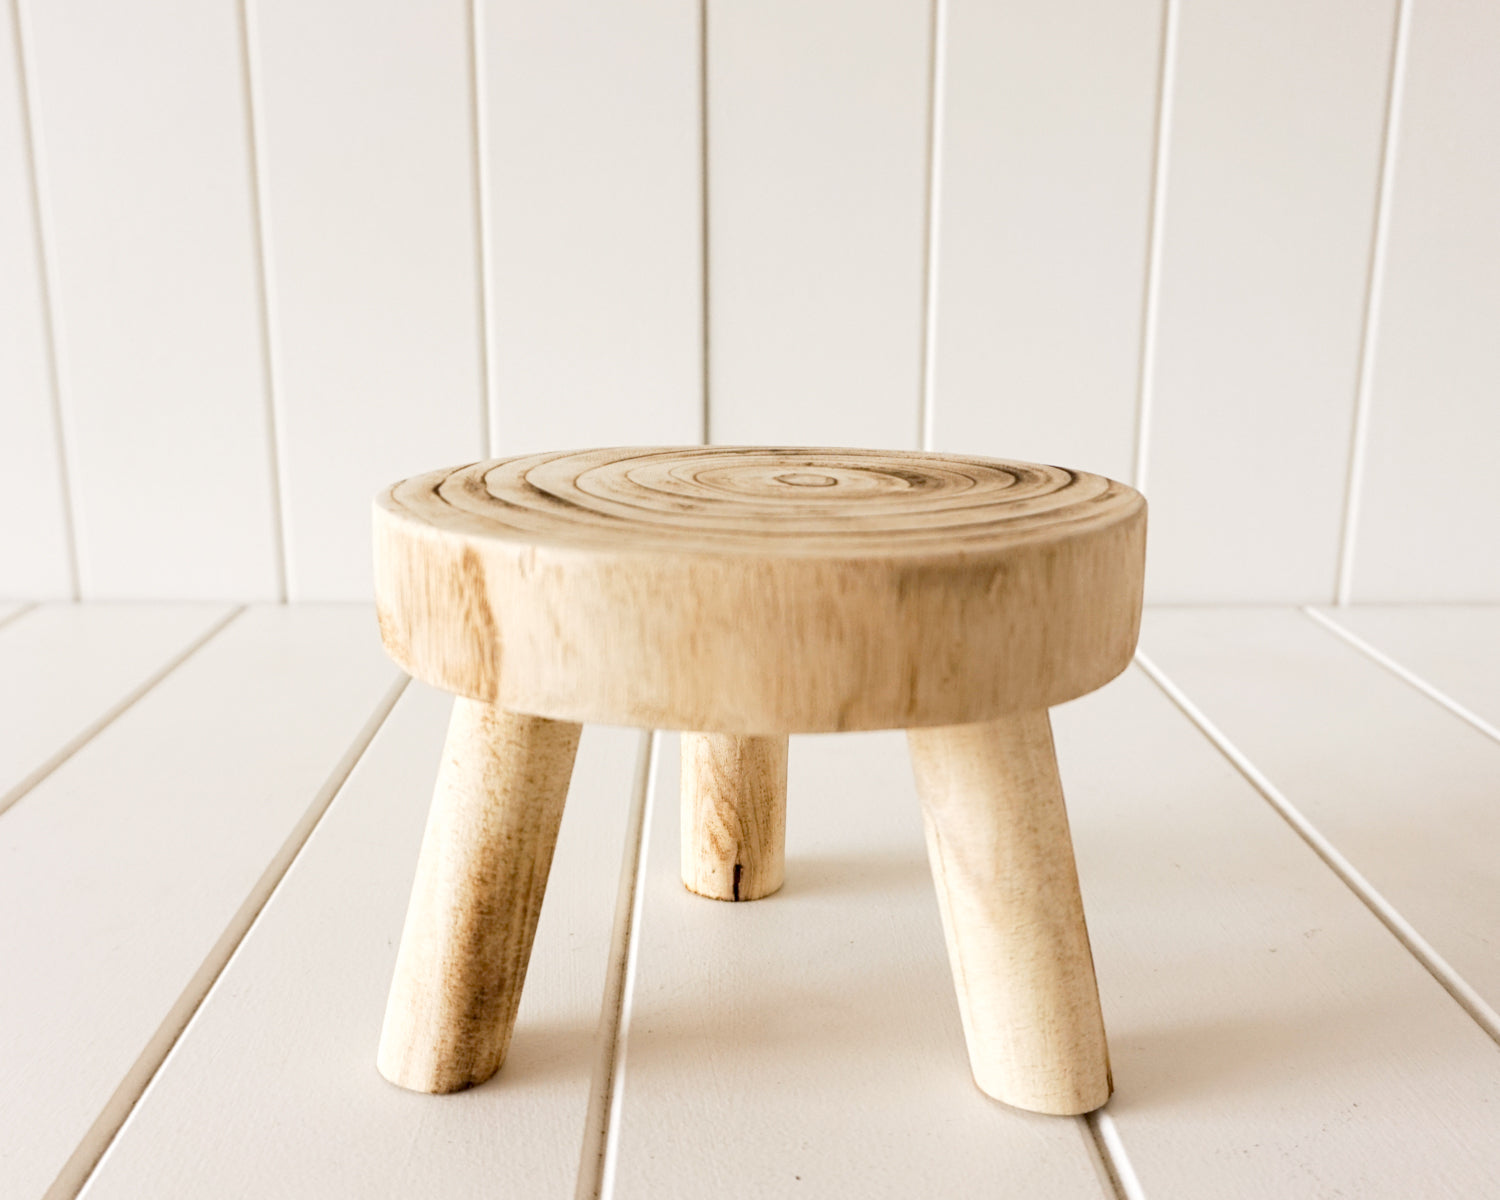 Small Timber Riser Plant Stand Stool - Natural